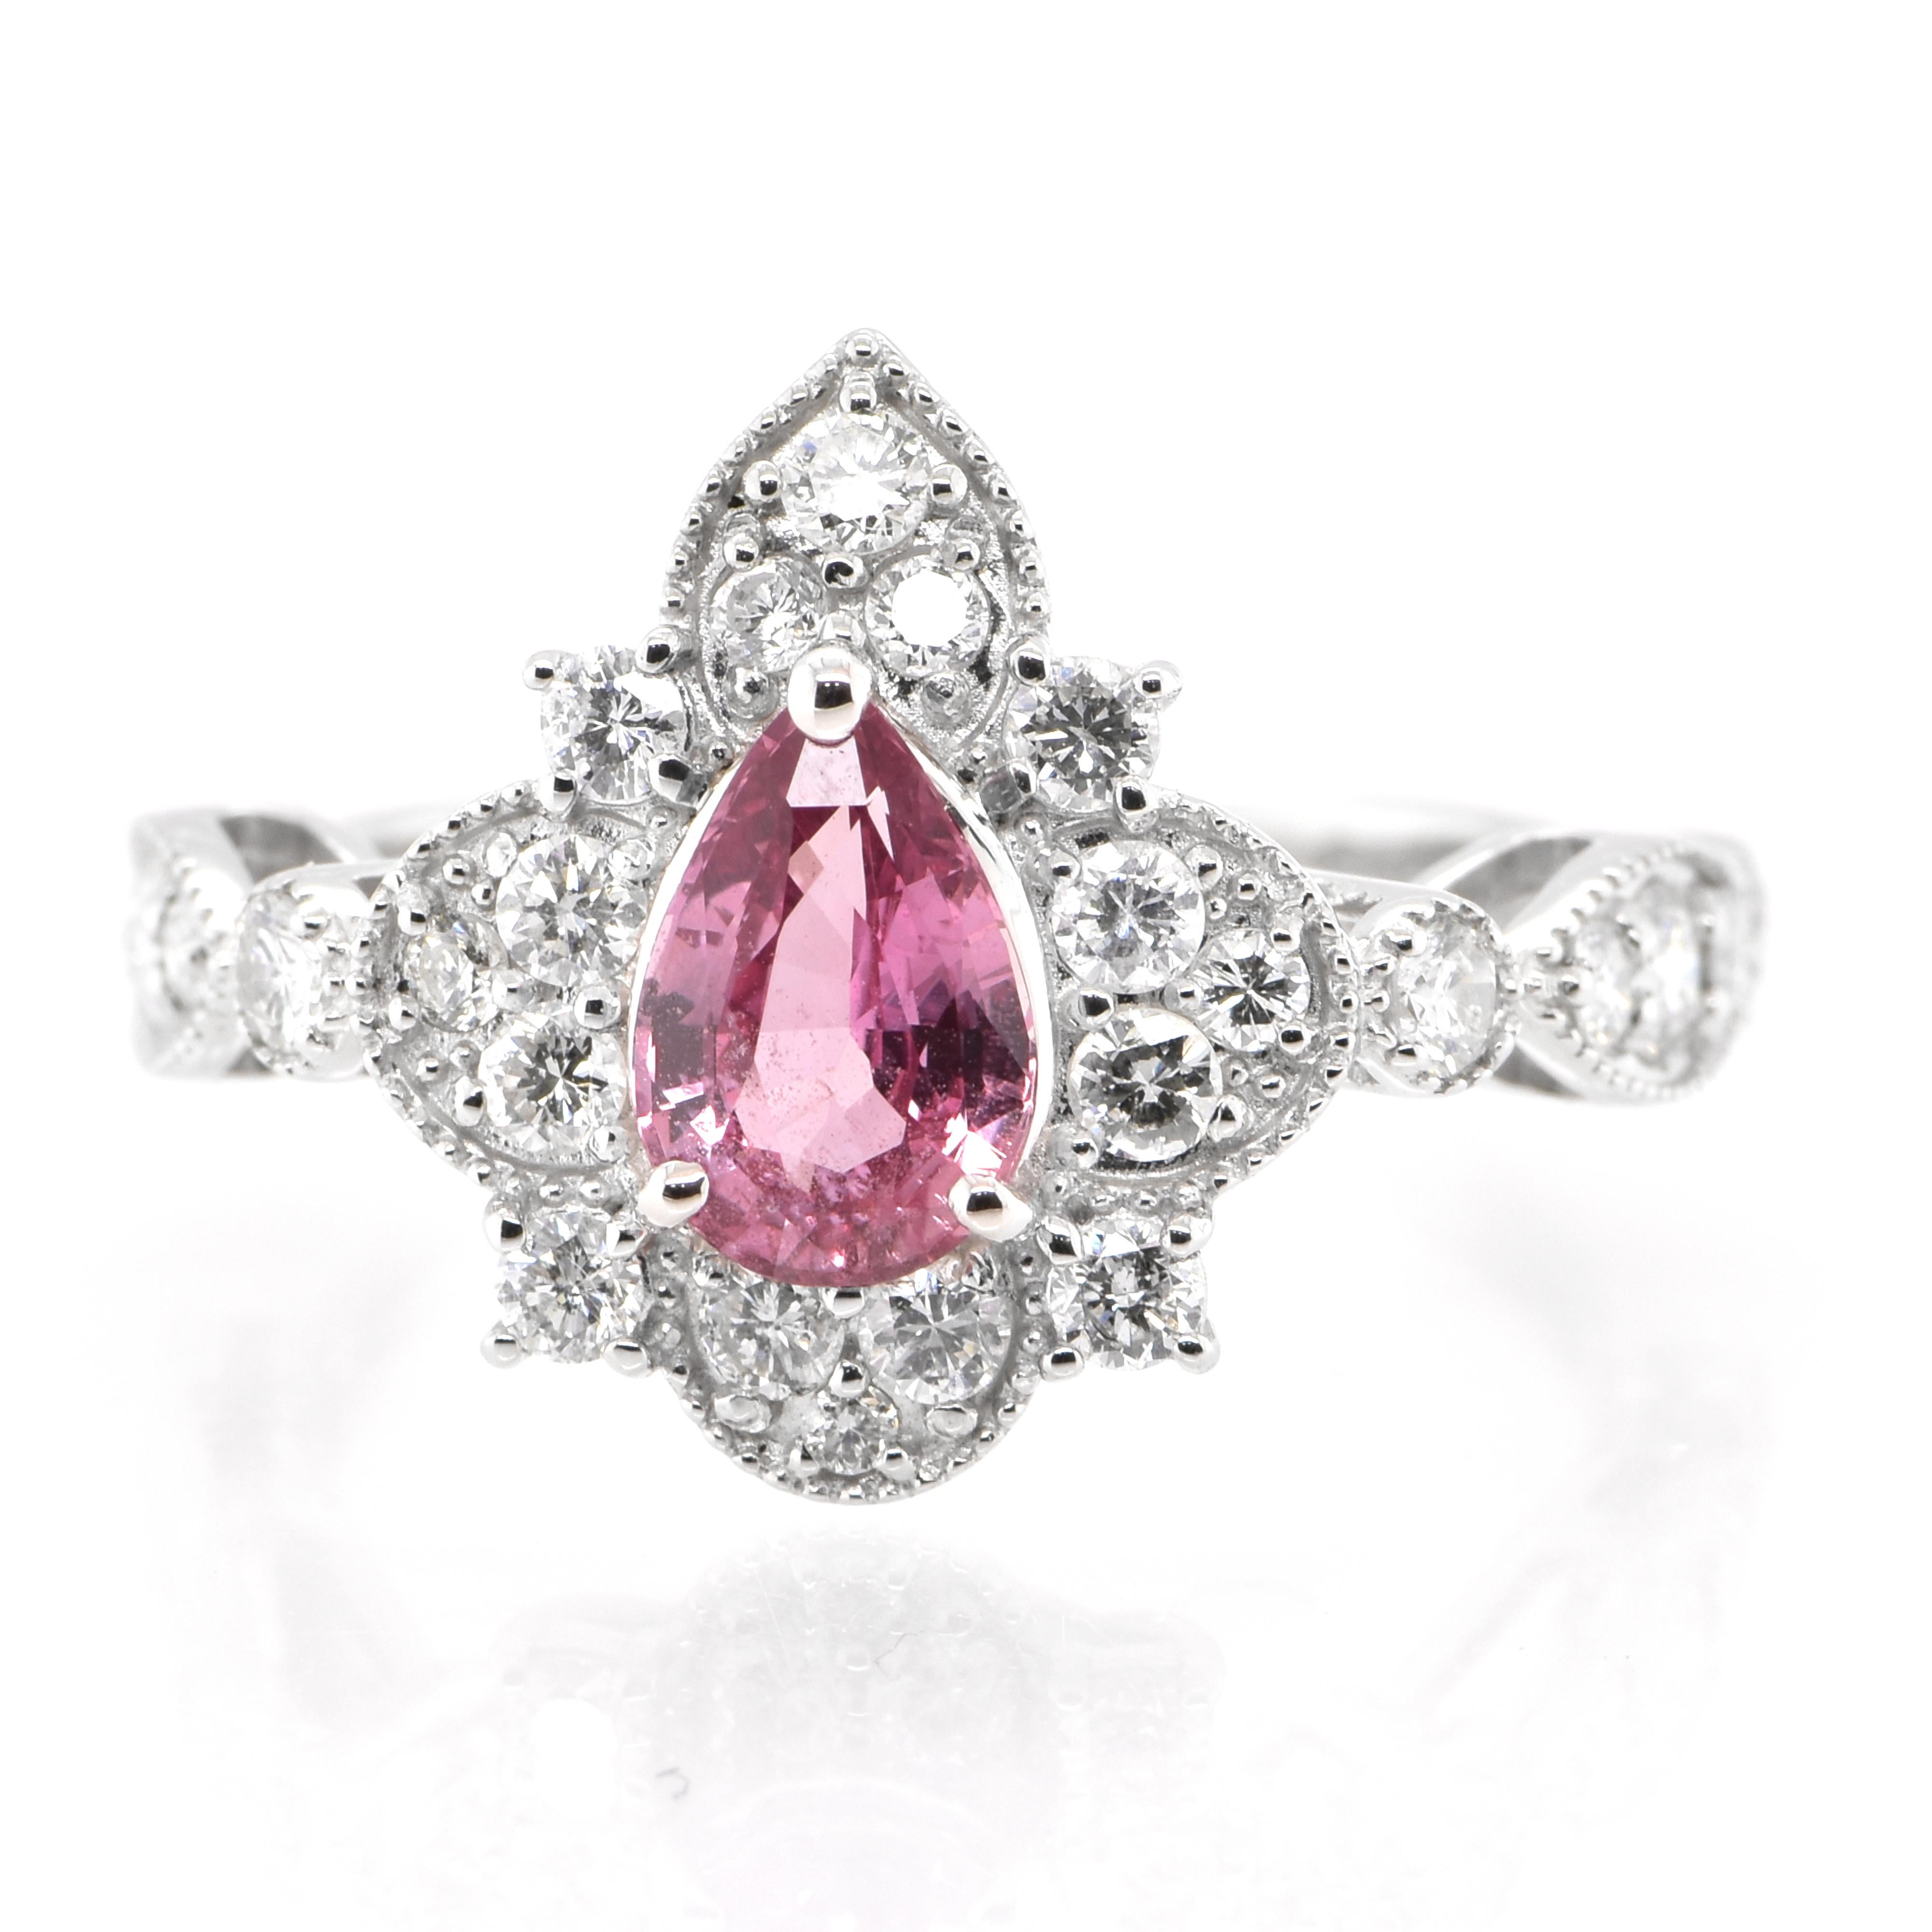 A beautiful ring featuring a AIGS Certified 0.98 Carat Natural Padparadscha Sapphire and 0.77 Carats of Diamond Accents set in Platinum. Sapphires have extraordinary durability - they excel in hardness as well as toughness and durability making them